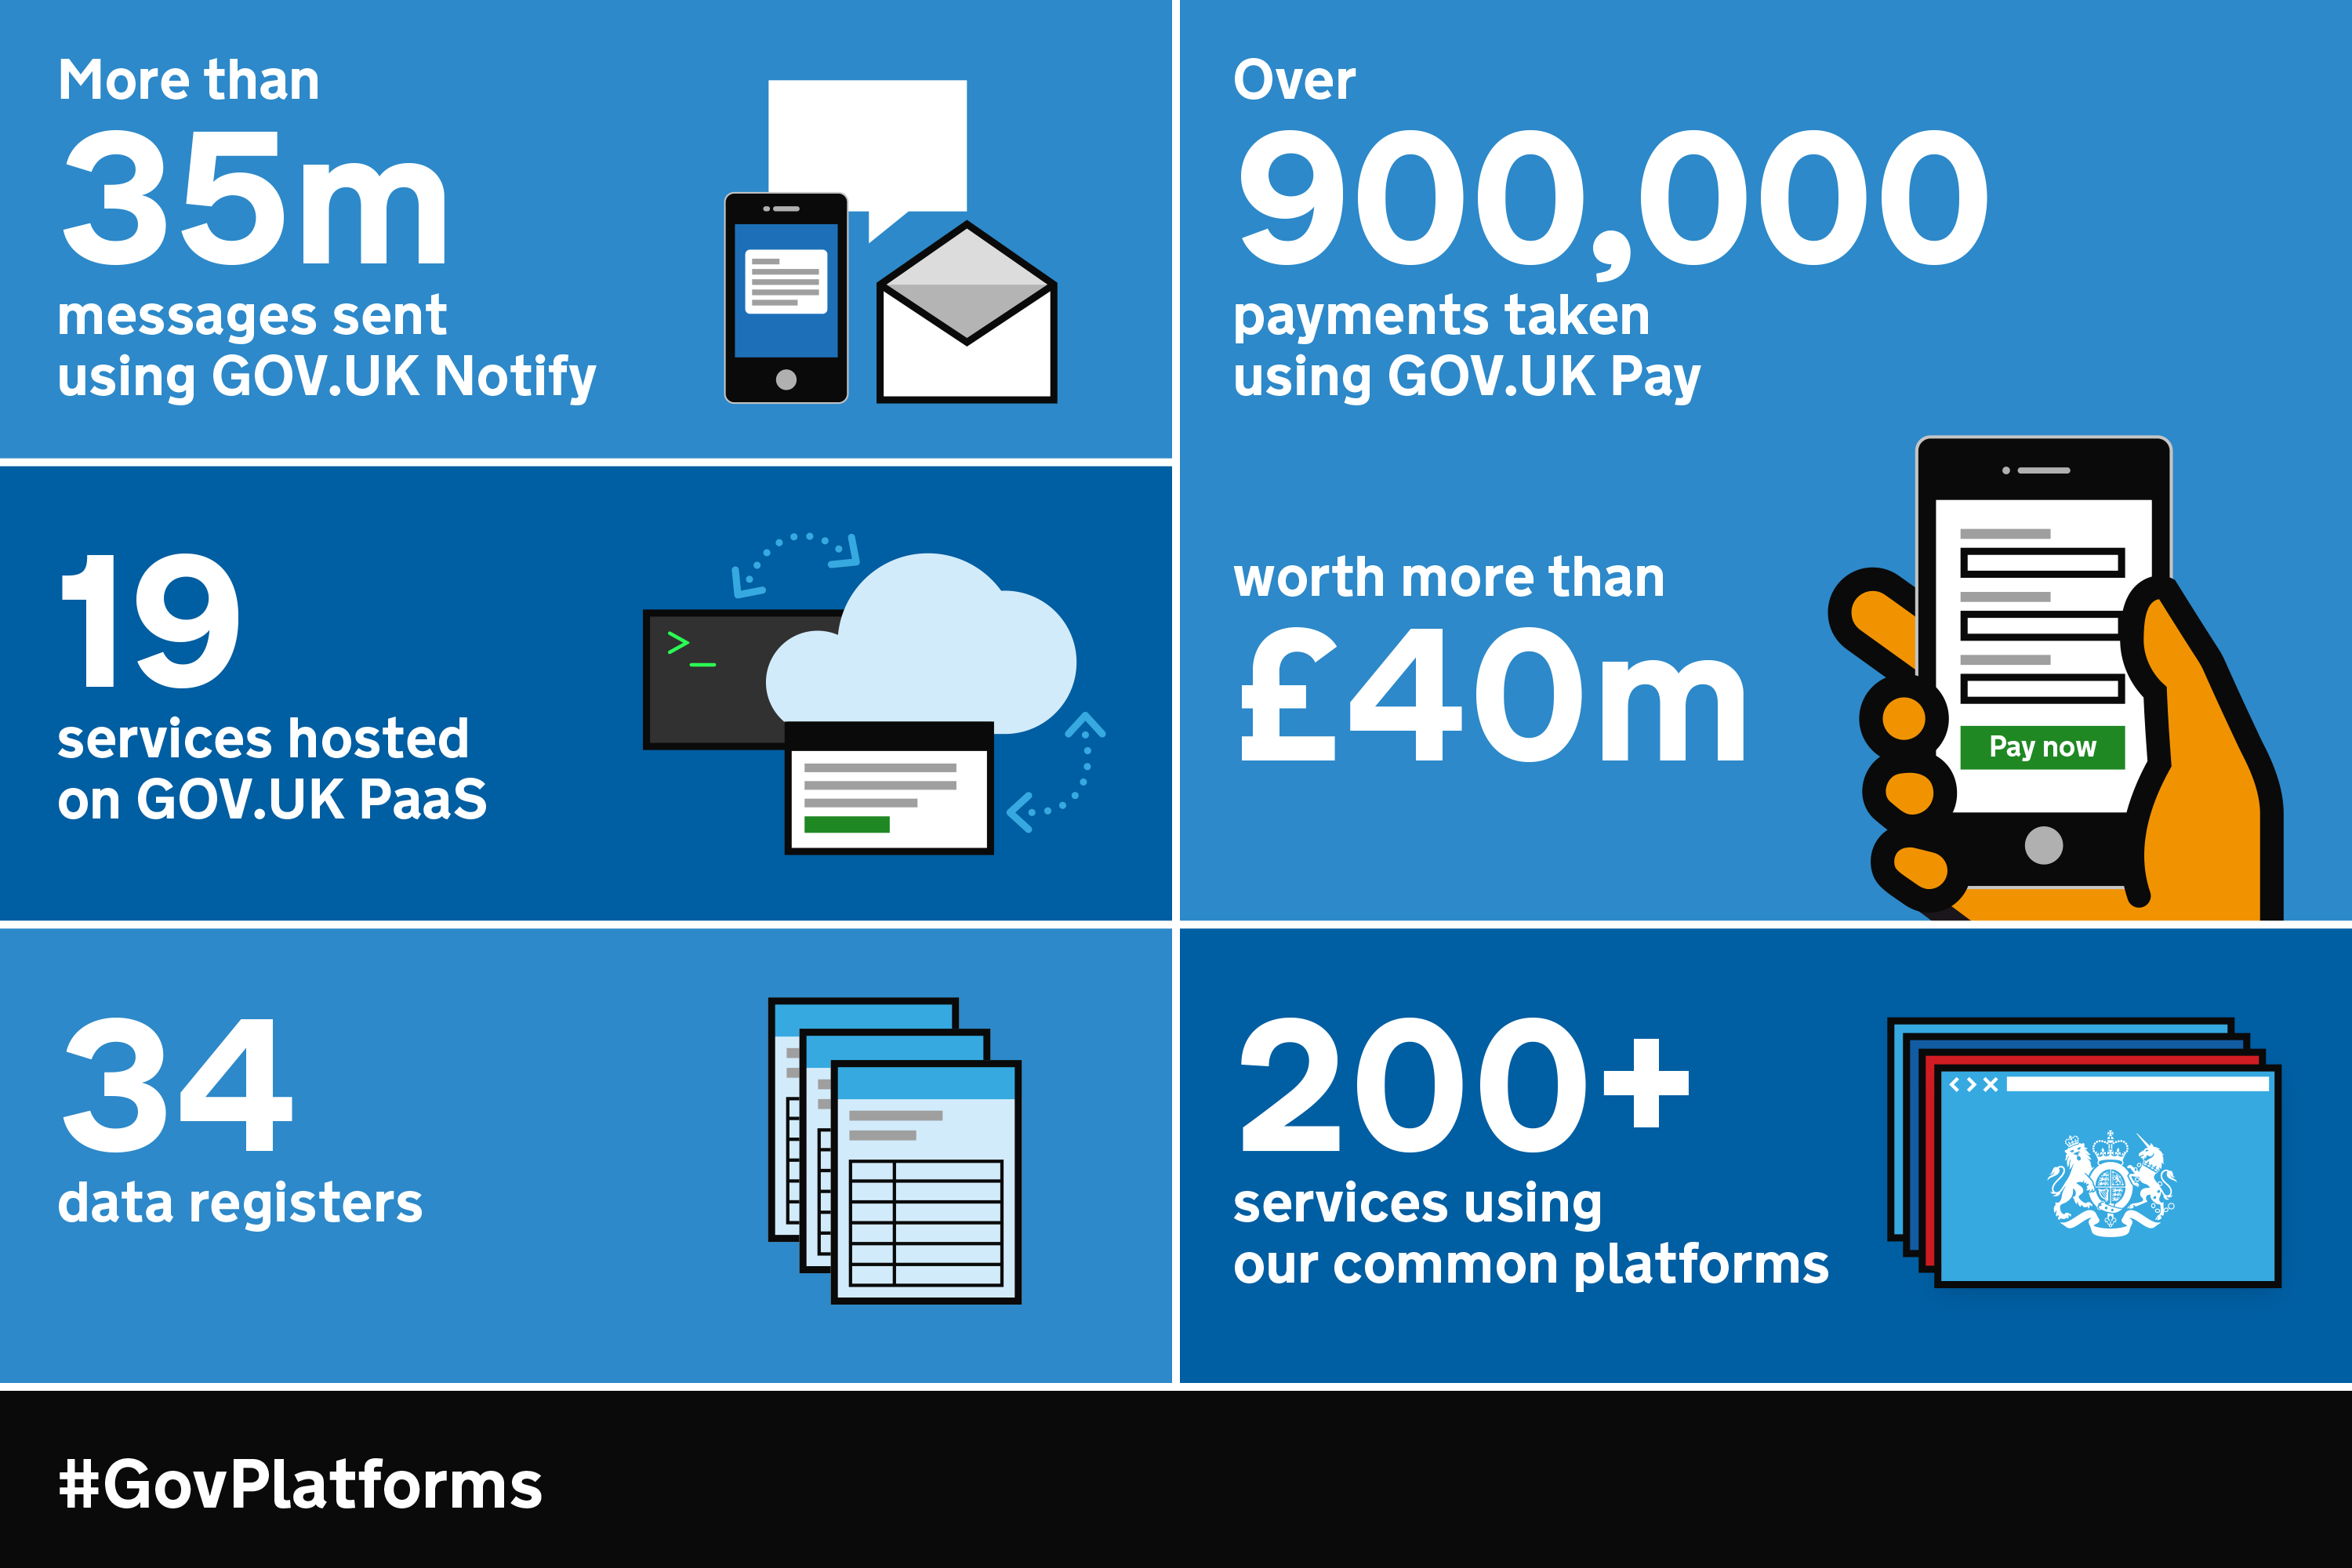 Infographic detailing facts and figures about Government as a Platform in March 2018: 35 million messages sent with GOV.UK Notify, 19 services hosted on Platform as a Service, 34 data registers, 900,000 payments made through GOV.UK Pay worth more than £40 million, and more than 200 services using Government as a a Platform's common components